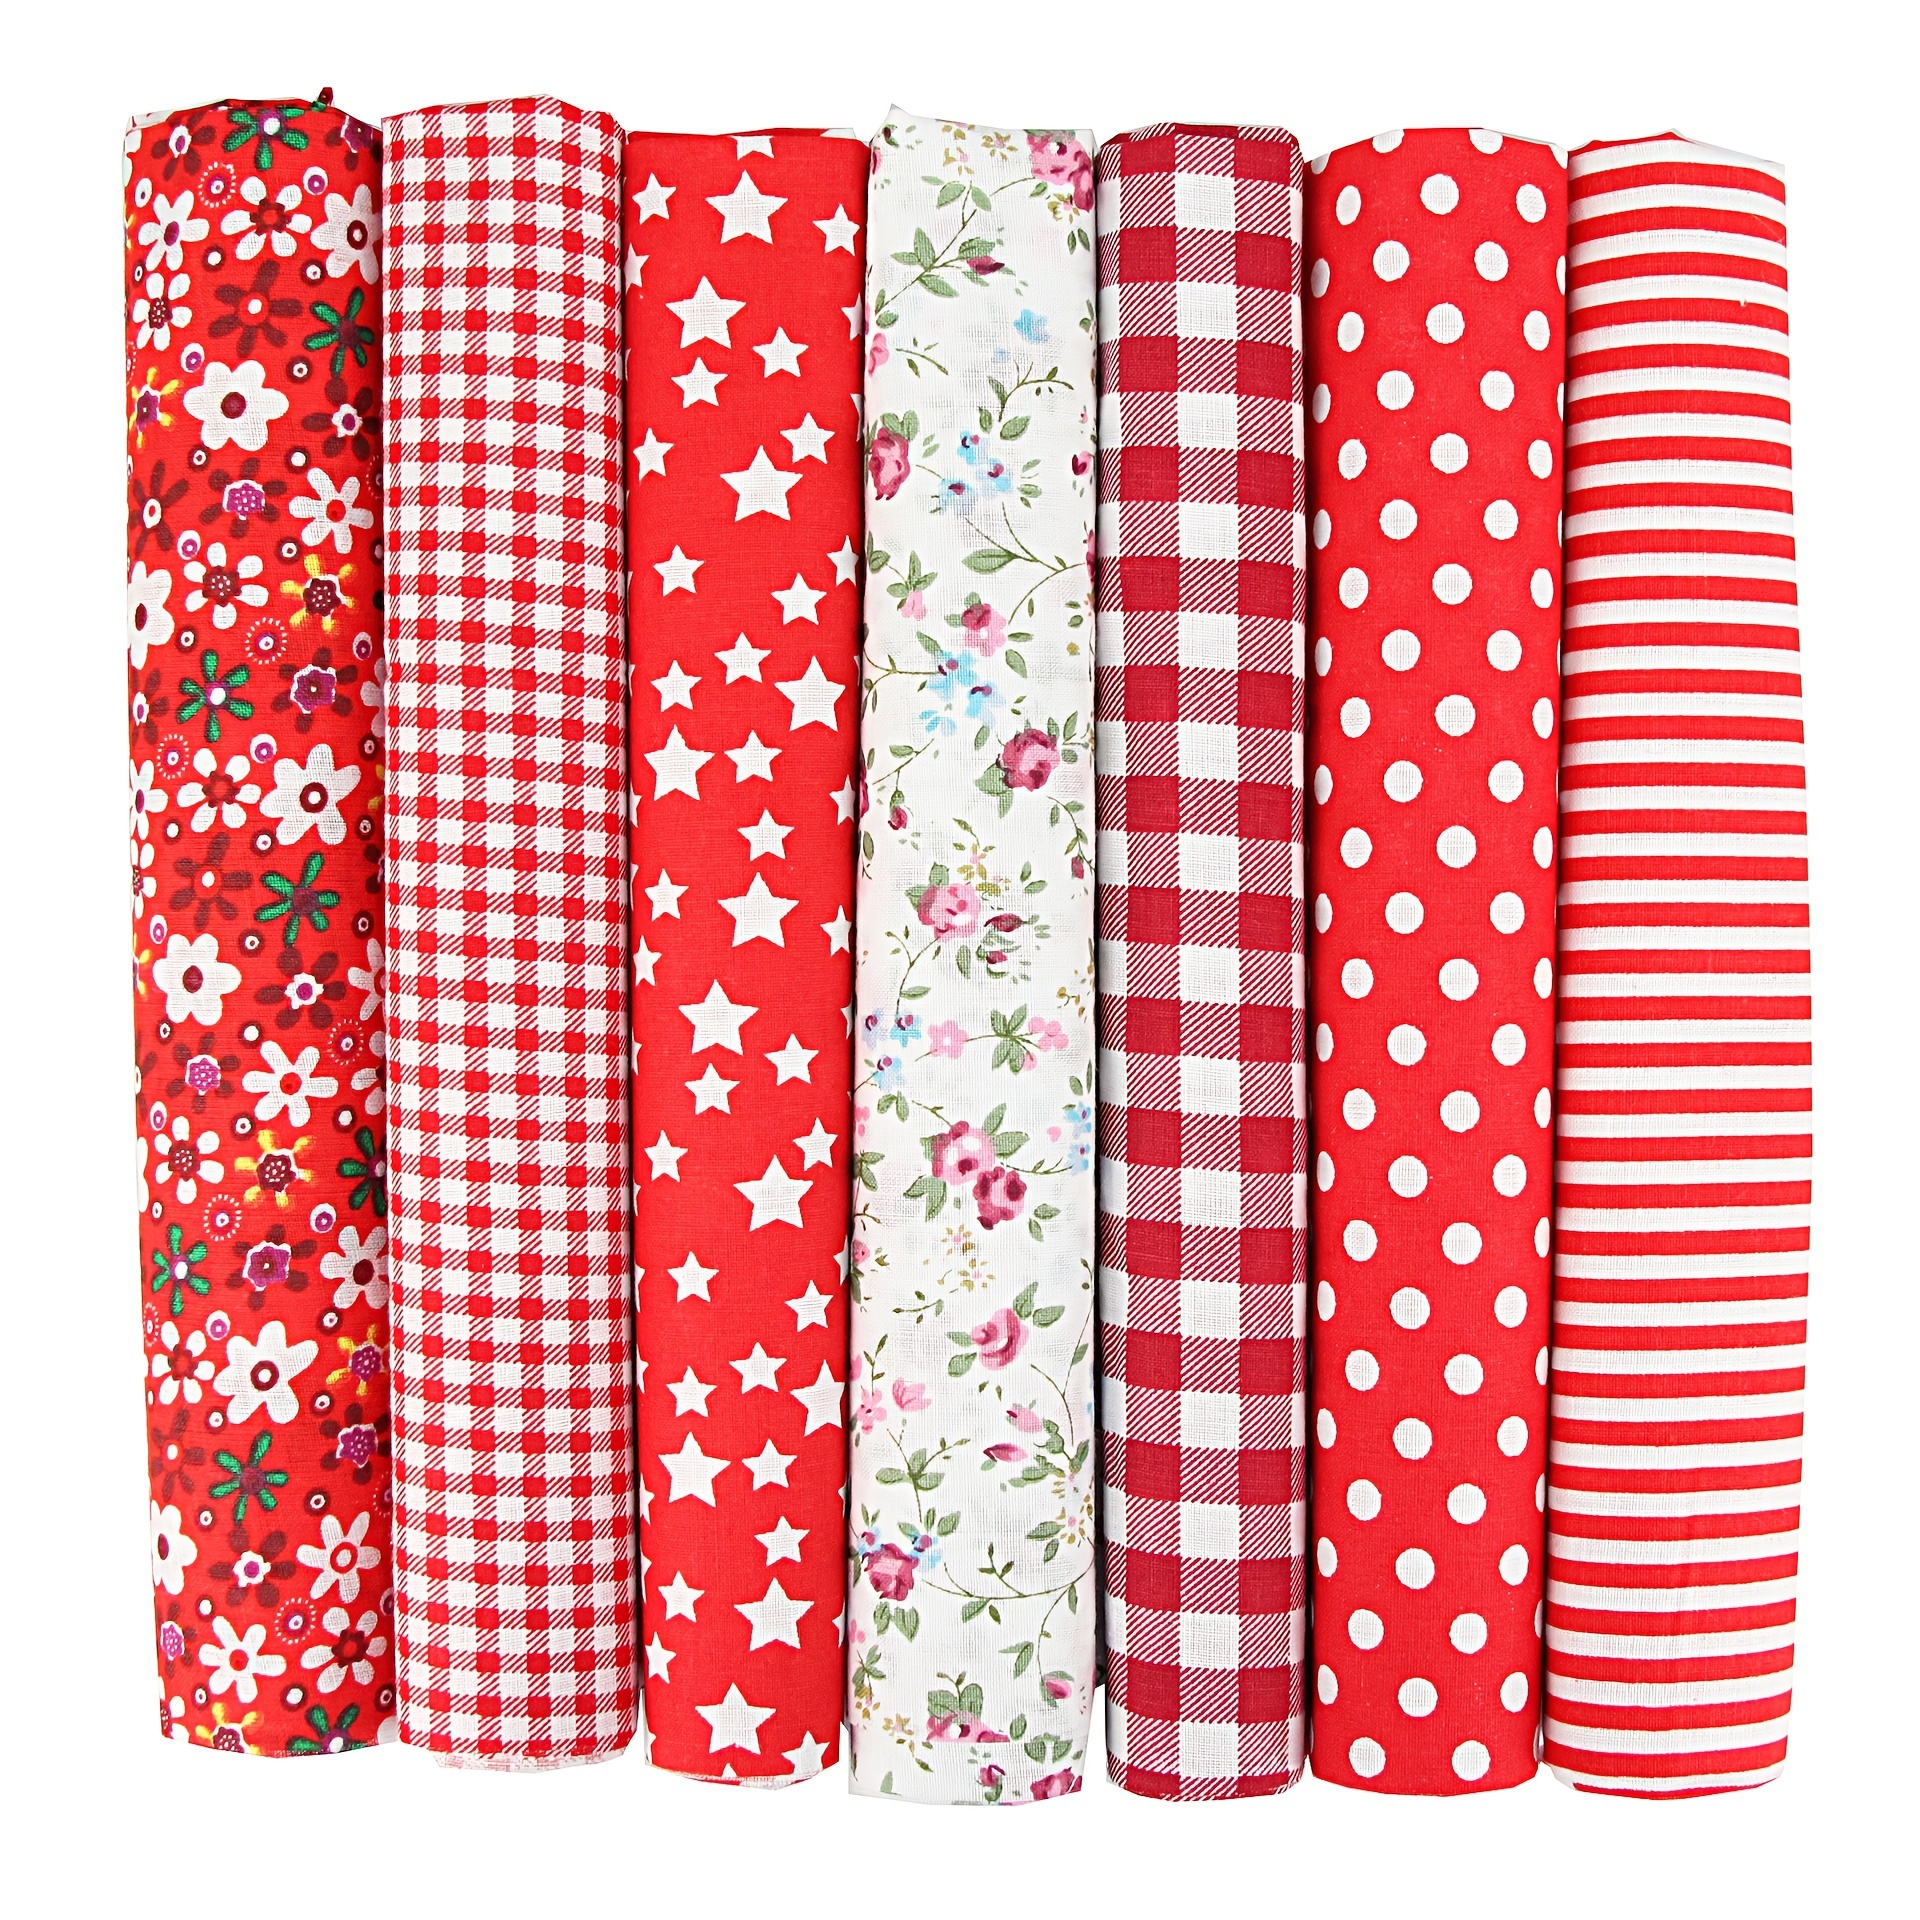 

7pcs 9.8"x 9.8" 25cm*25cm Handmade Cotton Fabric, 100% Floral Printed Sewing Supplies Fabric For Quilting Diy Sewing Stitching